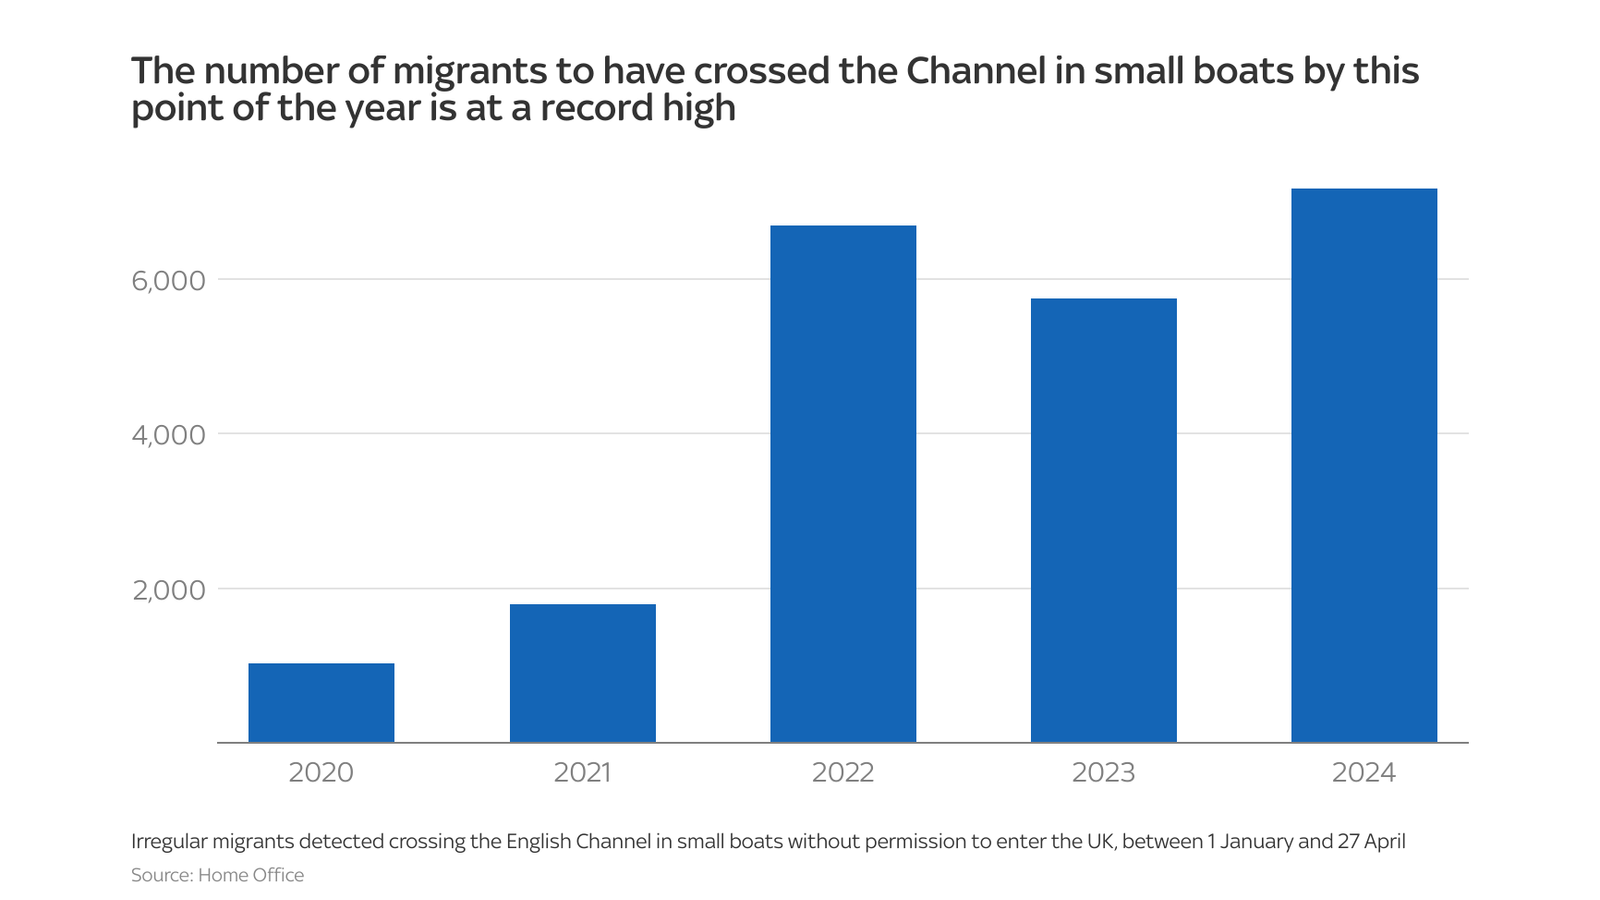 small boat migrant arrivals by late april at highest level ever